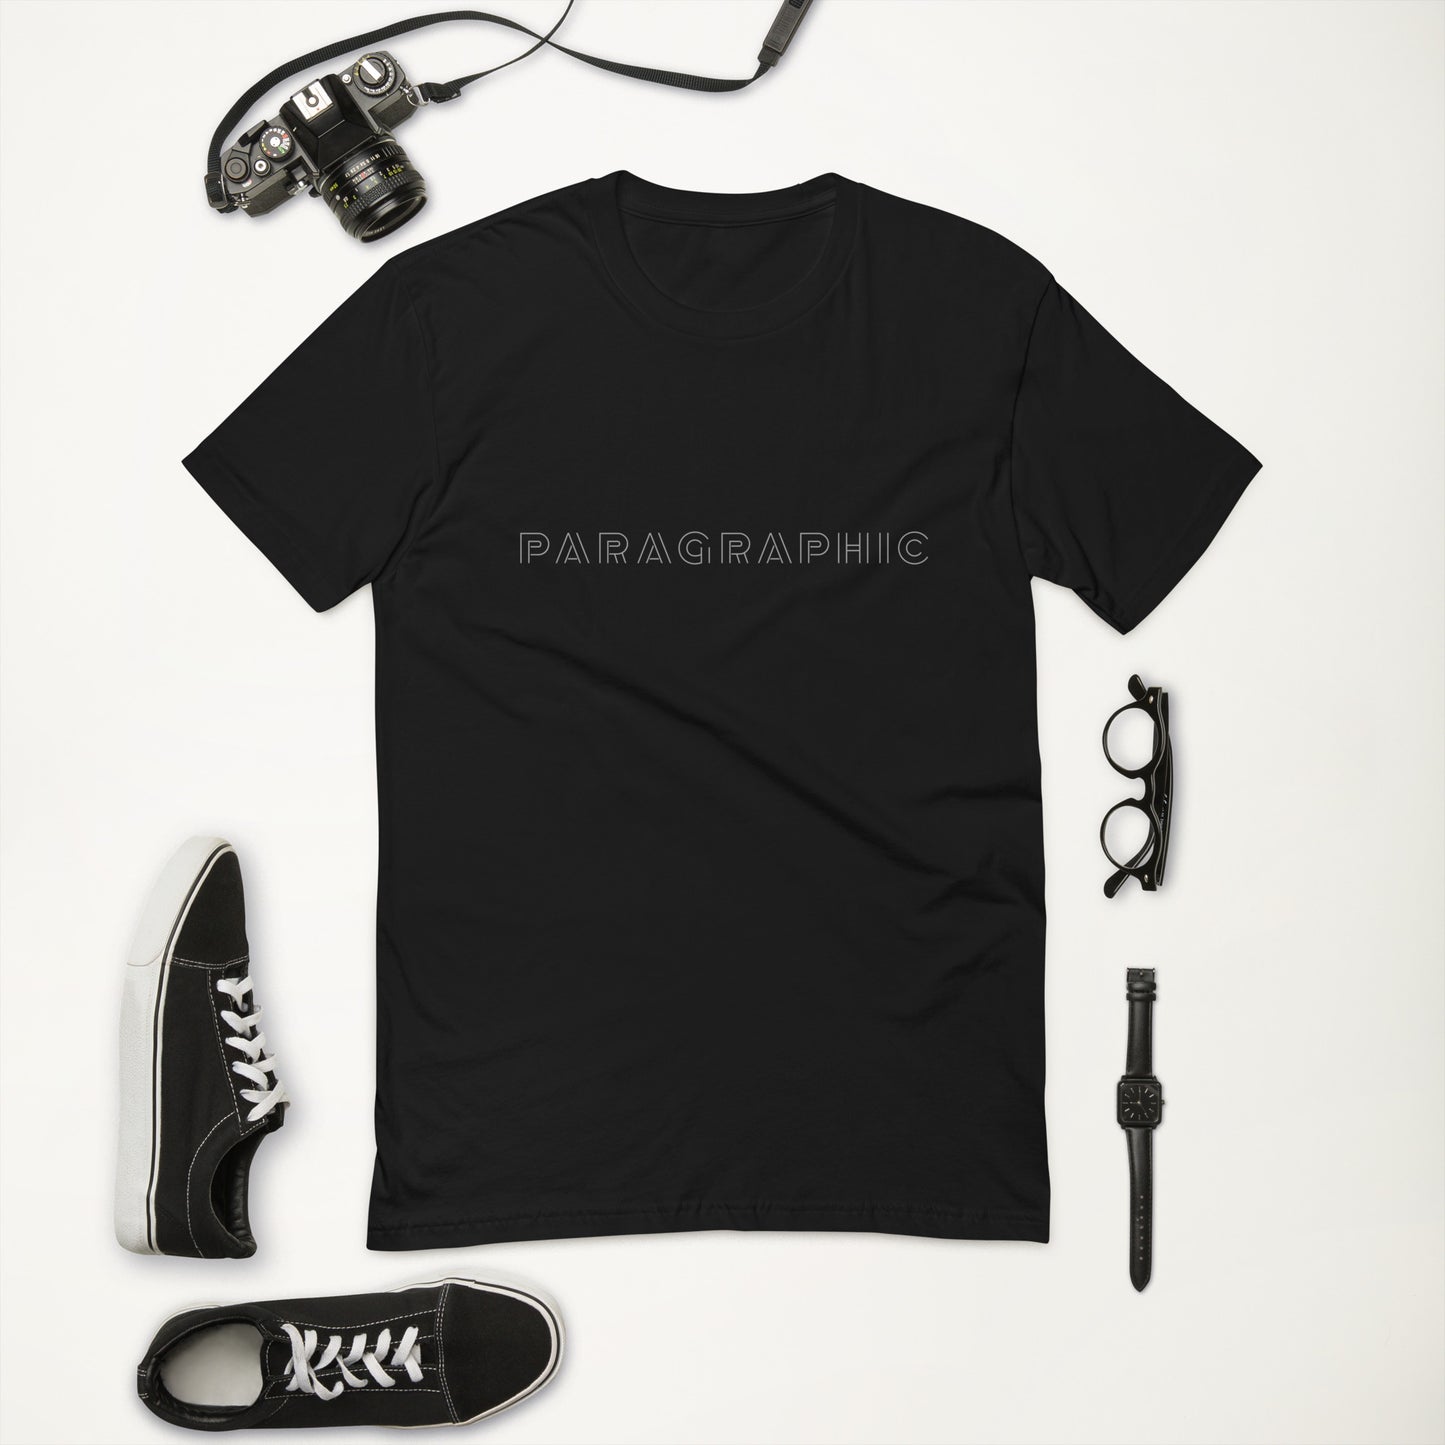 PARAGRAPHIC Classic Short Sleeve T-shirt